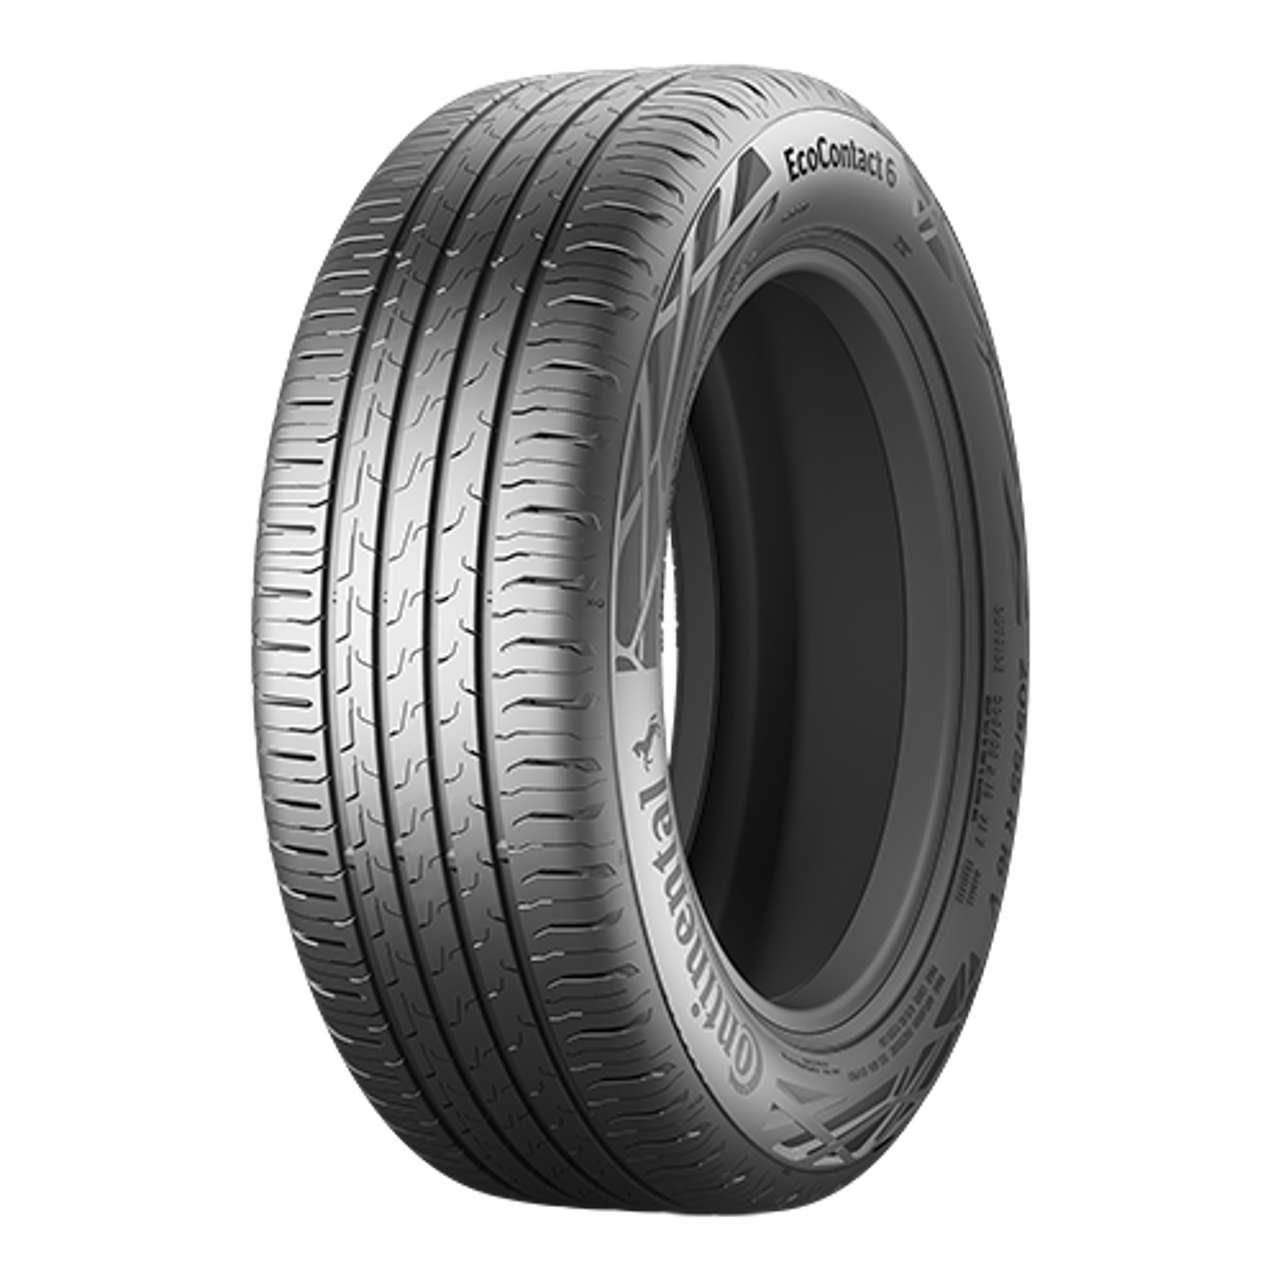 CONTINENTAL ECOCONTACT 6 (EVc) 215/55R17 94V